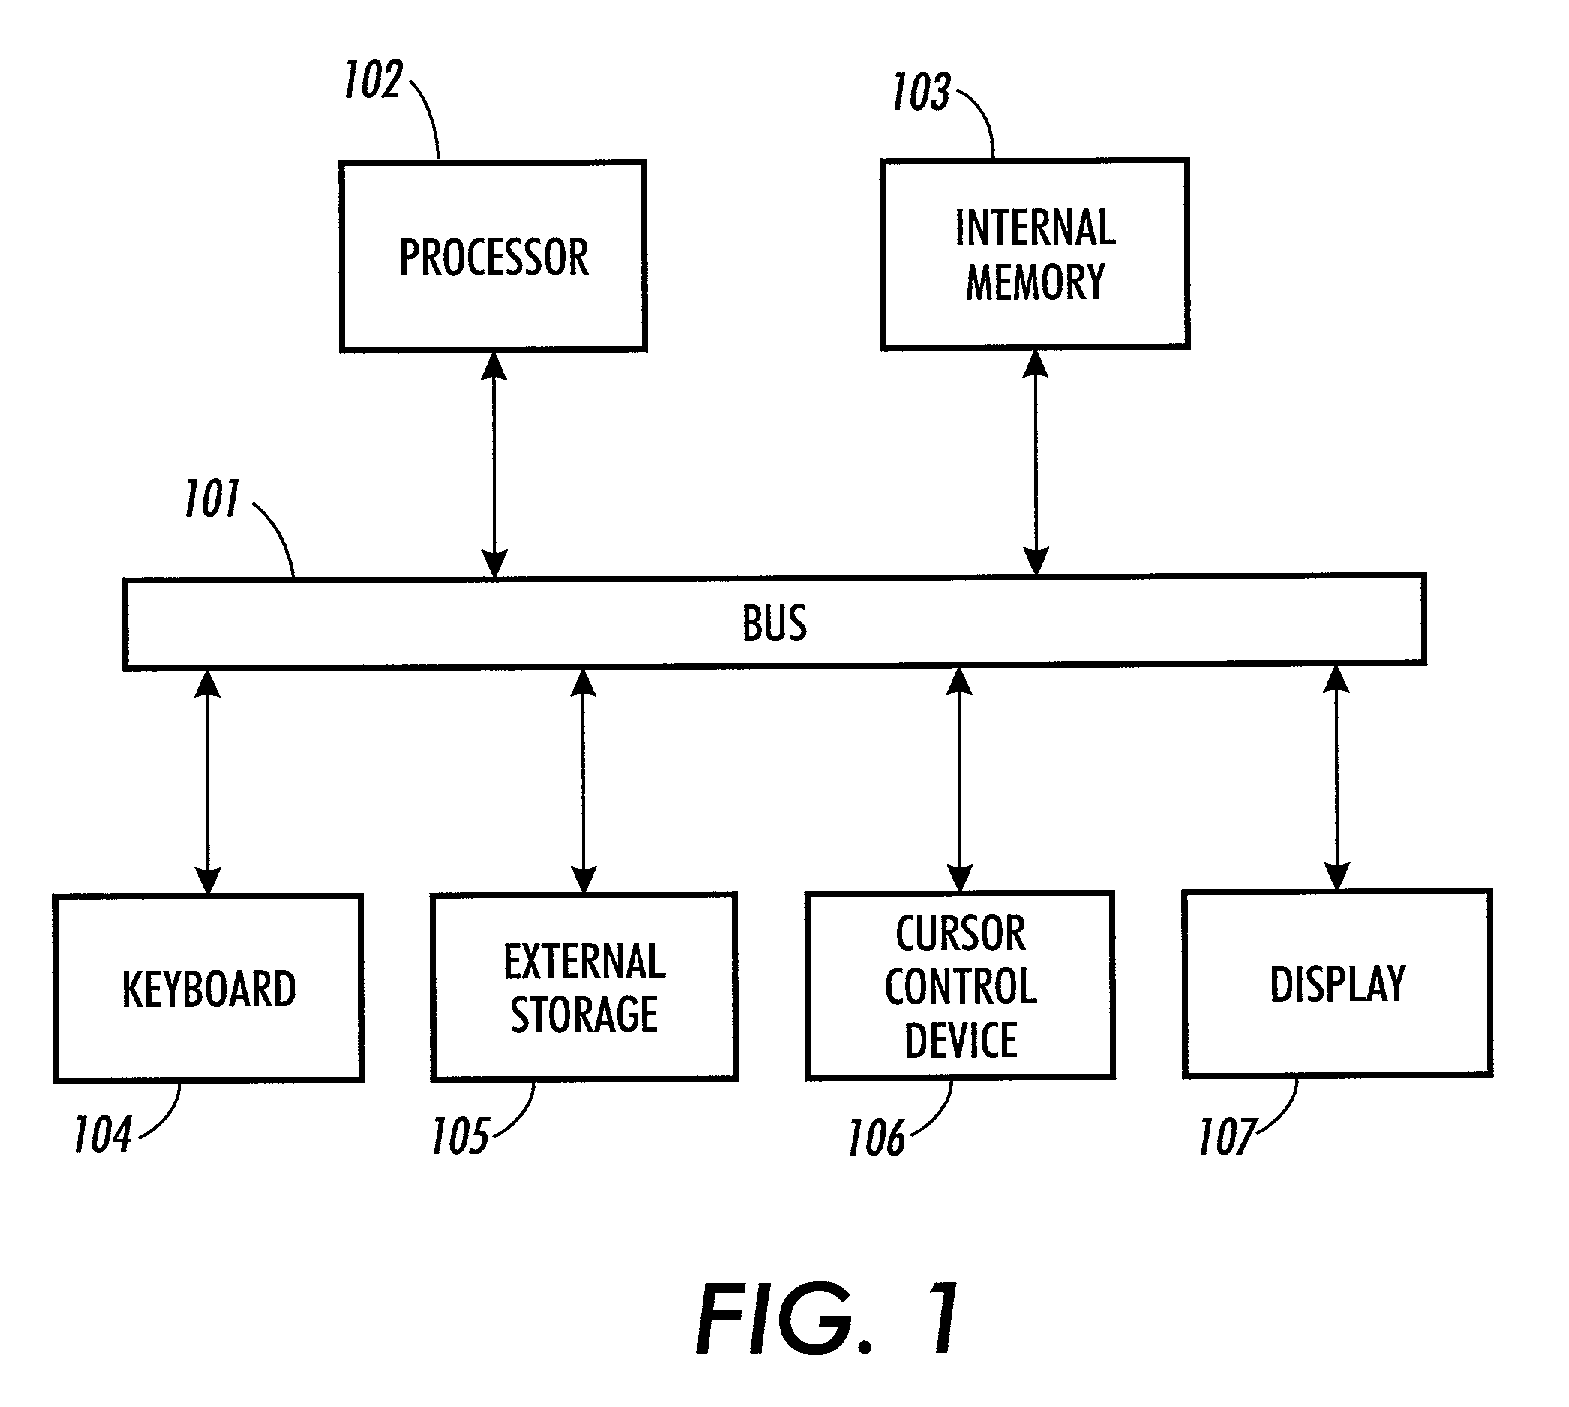 Method and apparatus for presenting e-mail threads as semi-connected text by removing redundant material